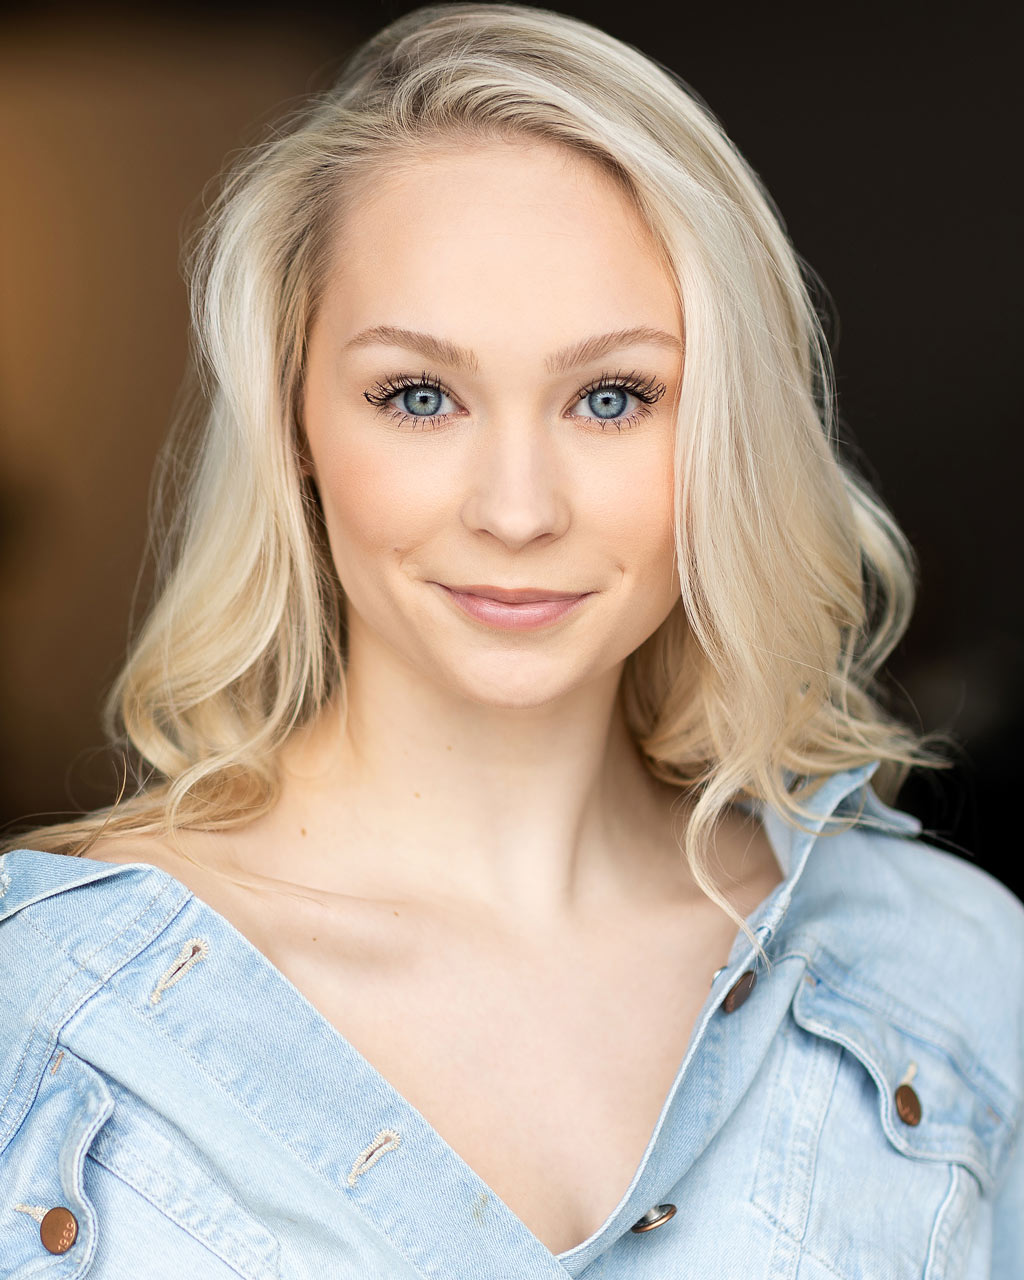 Dancer headshot of bright blue-eyed blond-haired female gently smiling at camera captured by professional headshot photographer Exulting Images